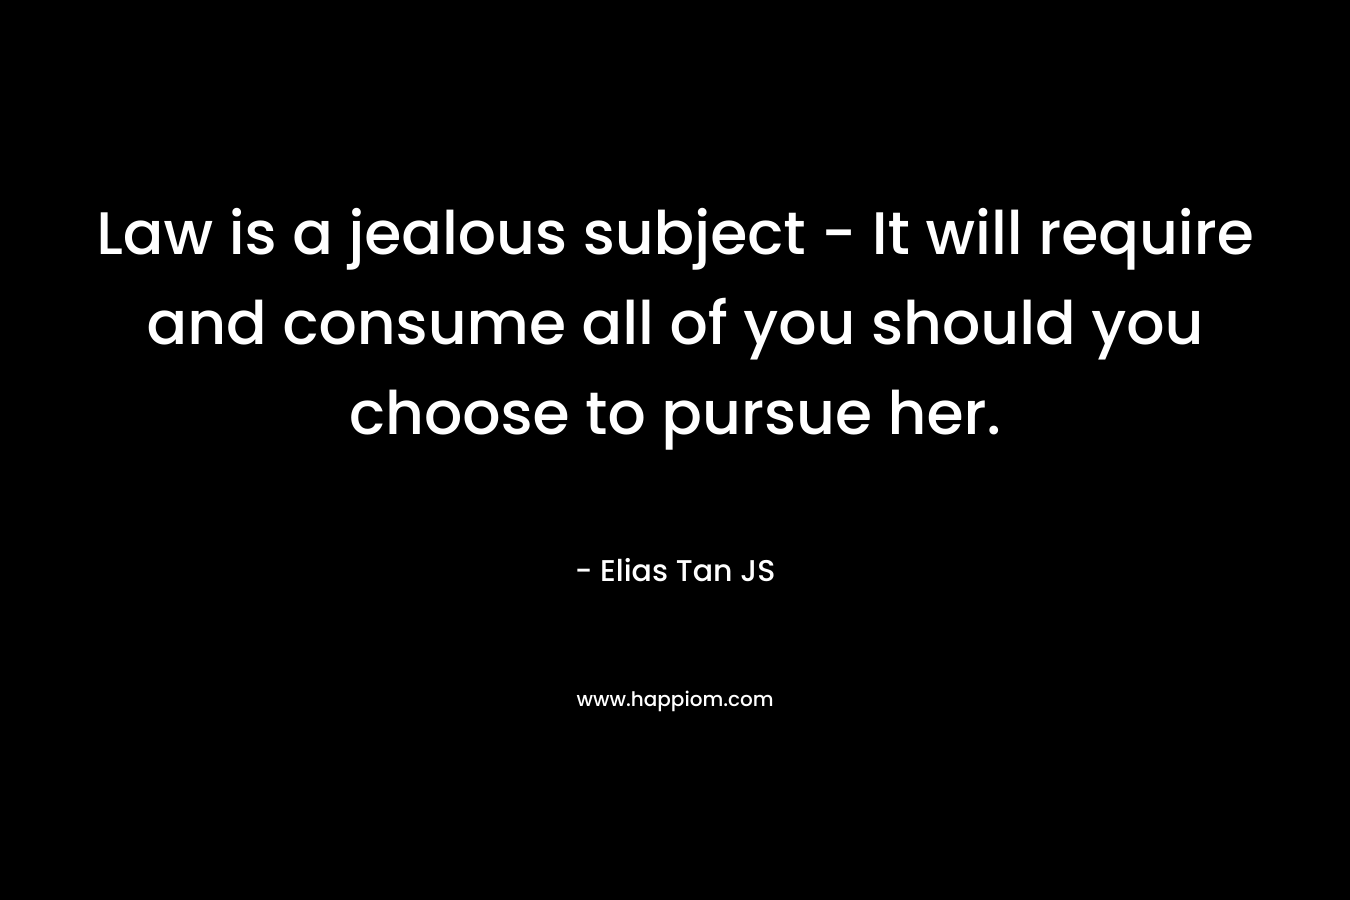 Law is a jealous subject - It will require and consume all of you should you choose to pursue her.